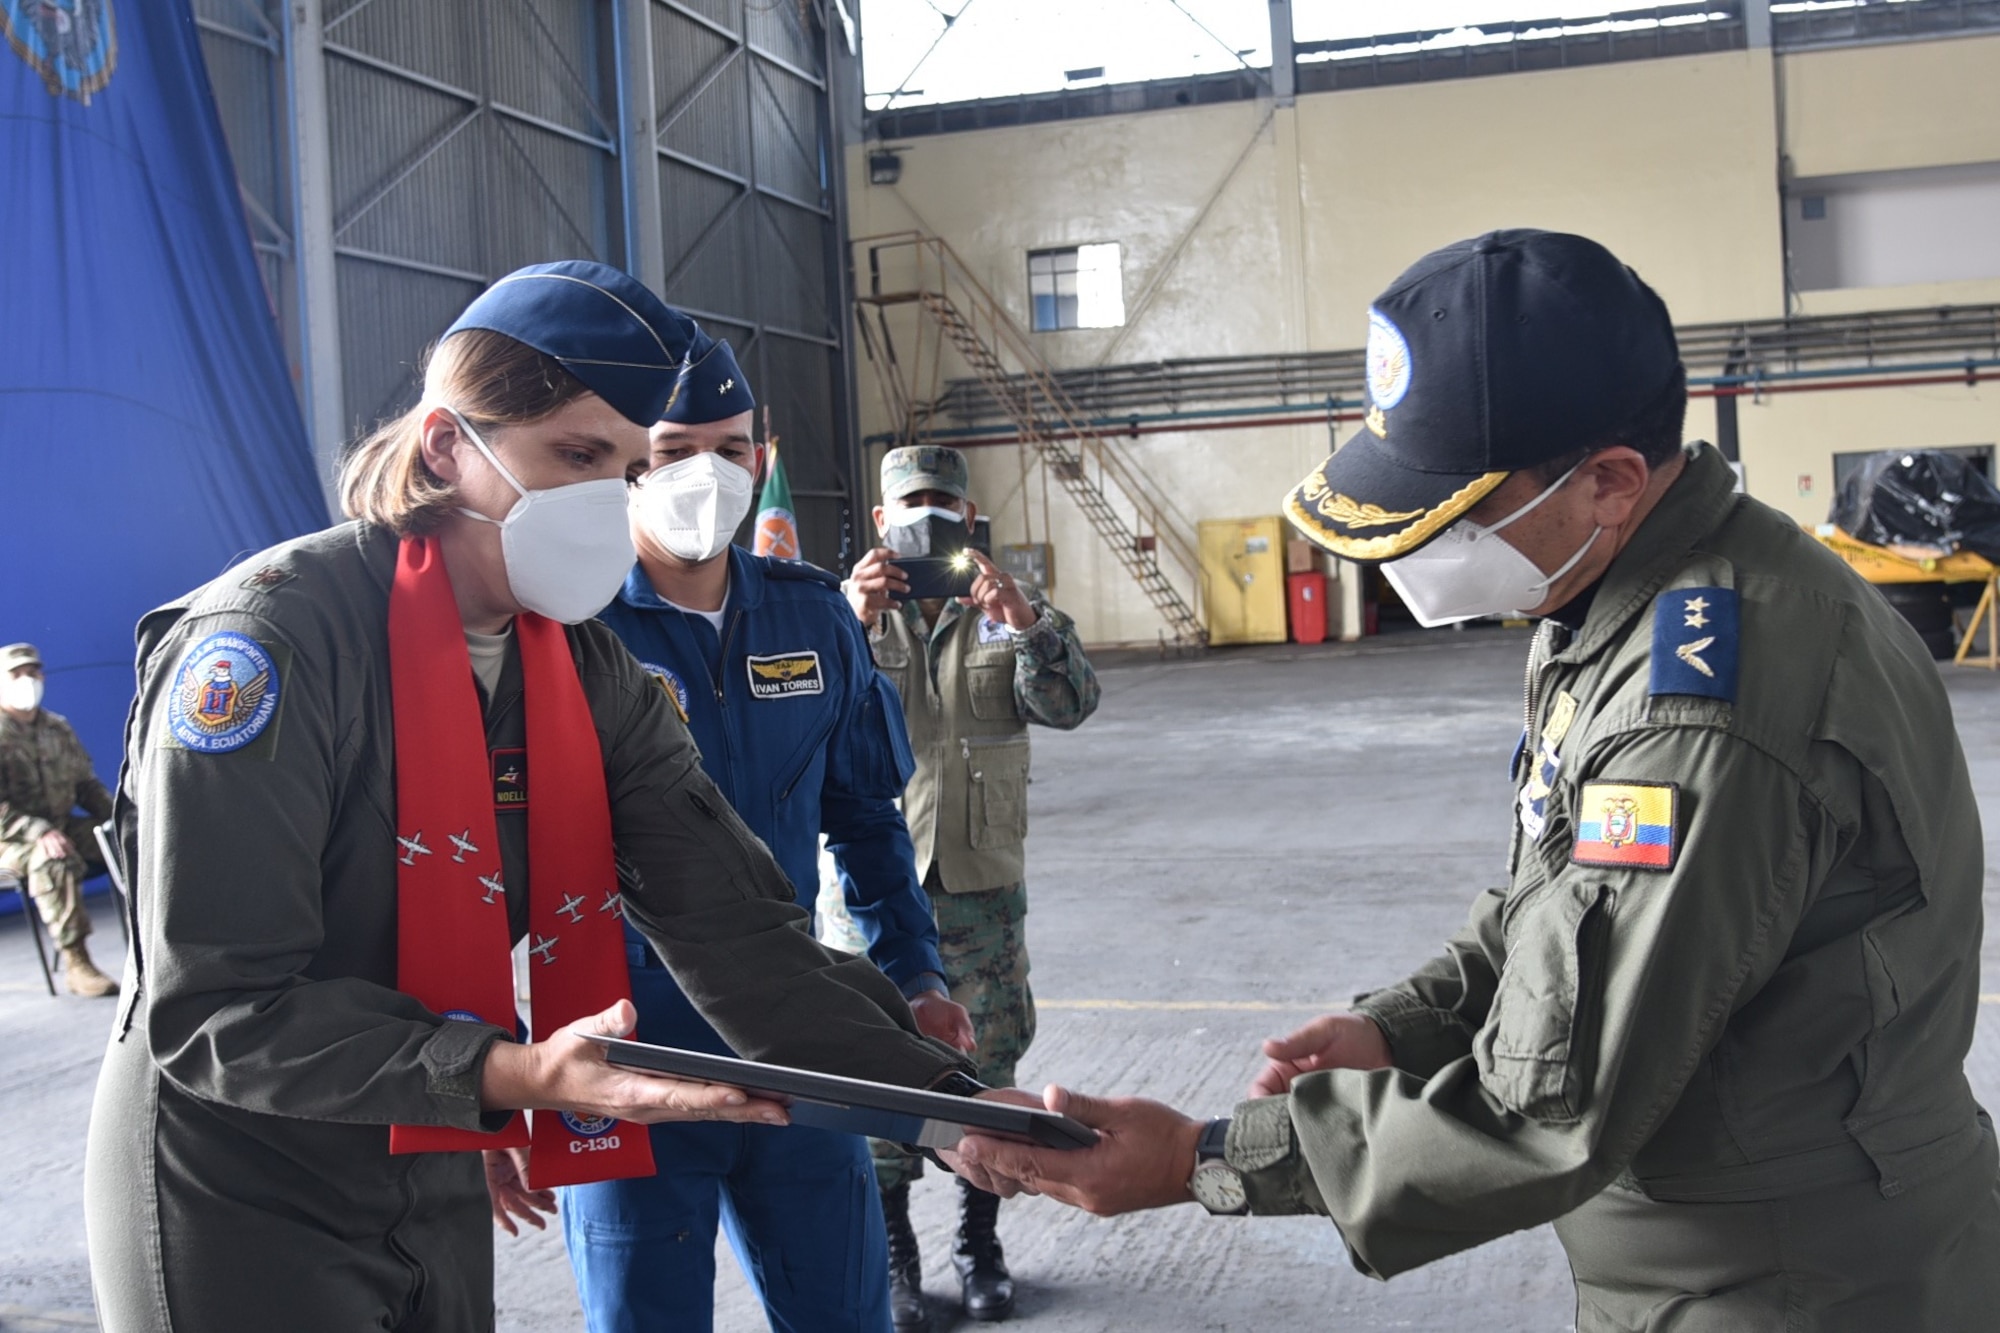 U.S. Air Force Maj. Noelle DeRuyter, 571st Mobility Support Advisory Squadron mission commander, presents the commander of the Fuerza Aérea Ecuatoriana’s 11th Transportation Wing, Lt. Col. Jorge Alcázar Sevilla, a commemorative plaque from the 20-10 Mobile Training Team July 31, 2020, at Cotopaxi Air Force Base in Latacunga, Ecuador. (U.S. Air Force photo by Master Sgt. Freddy Muñoz)